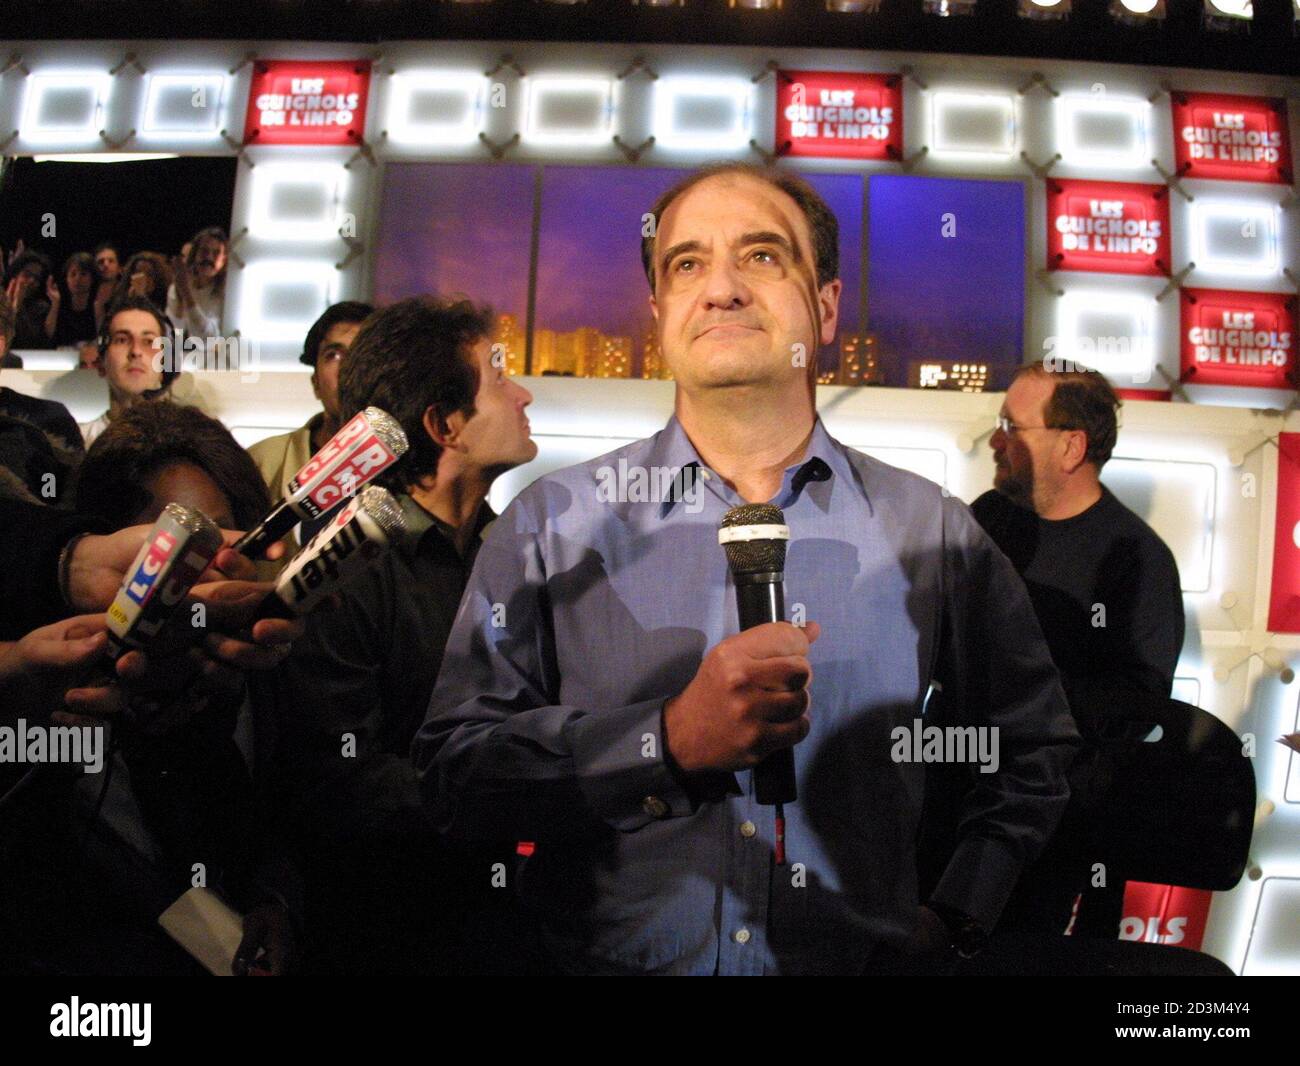 Pierre Lescure (C) speaks to staff after being sacked at the French pay-TV station Canal Plus in Paris, April 16, 2002. [Earlier Jean-Marie Messier, the CEO of Vivendi Universal and owner of Vivendi's Canal Plus pay TV unit, announced that top executive Lescure had resigned his post and would be replaced by TF1 television group senior executive Xavier Couture. Union representative at Canal Plus denounced the dumping of popular station chief Lescure.] Stock Photo